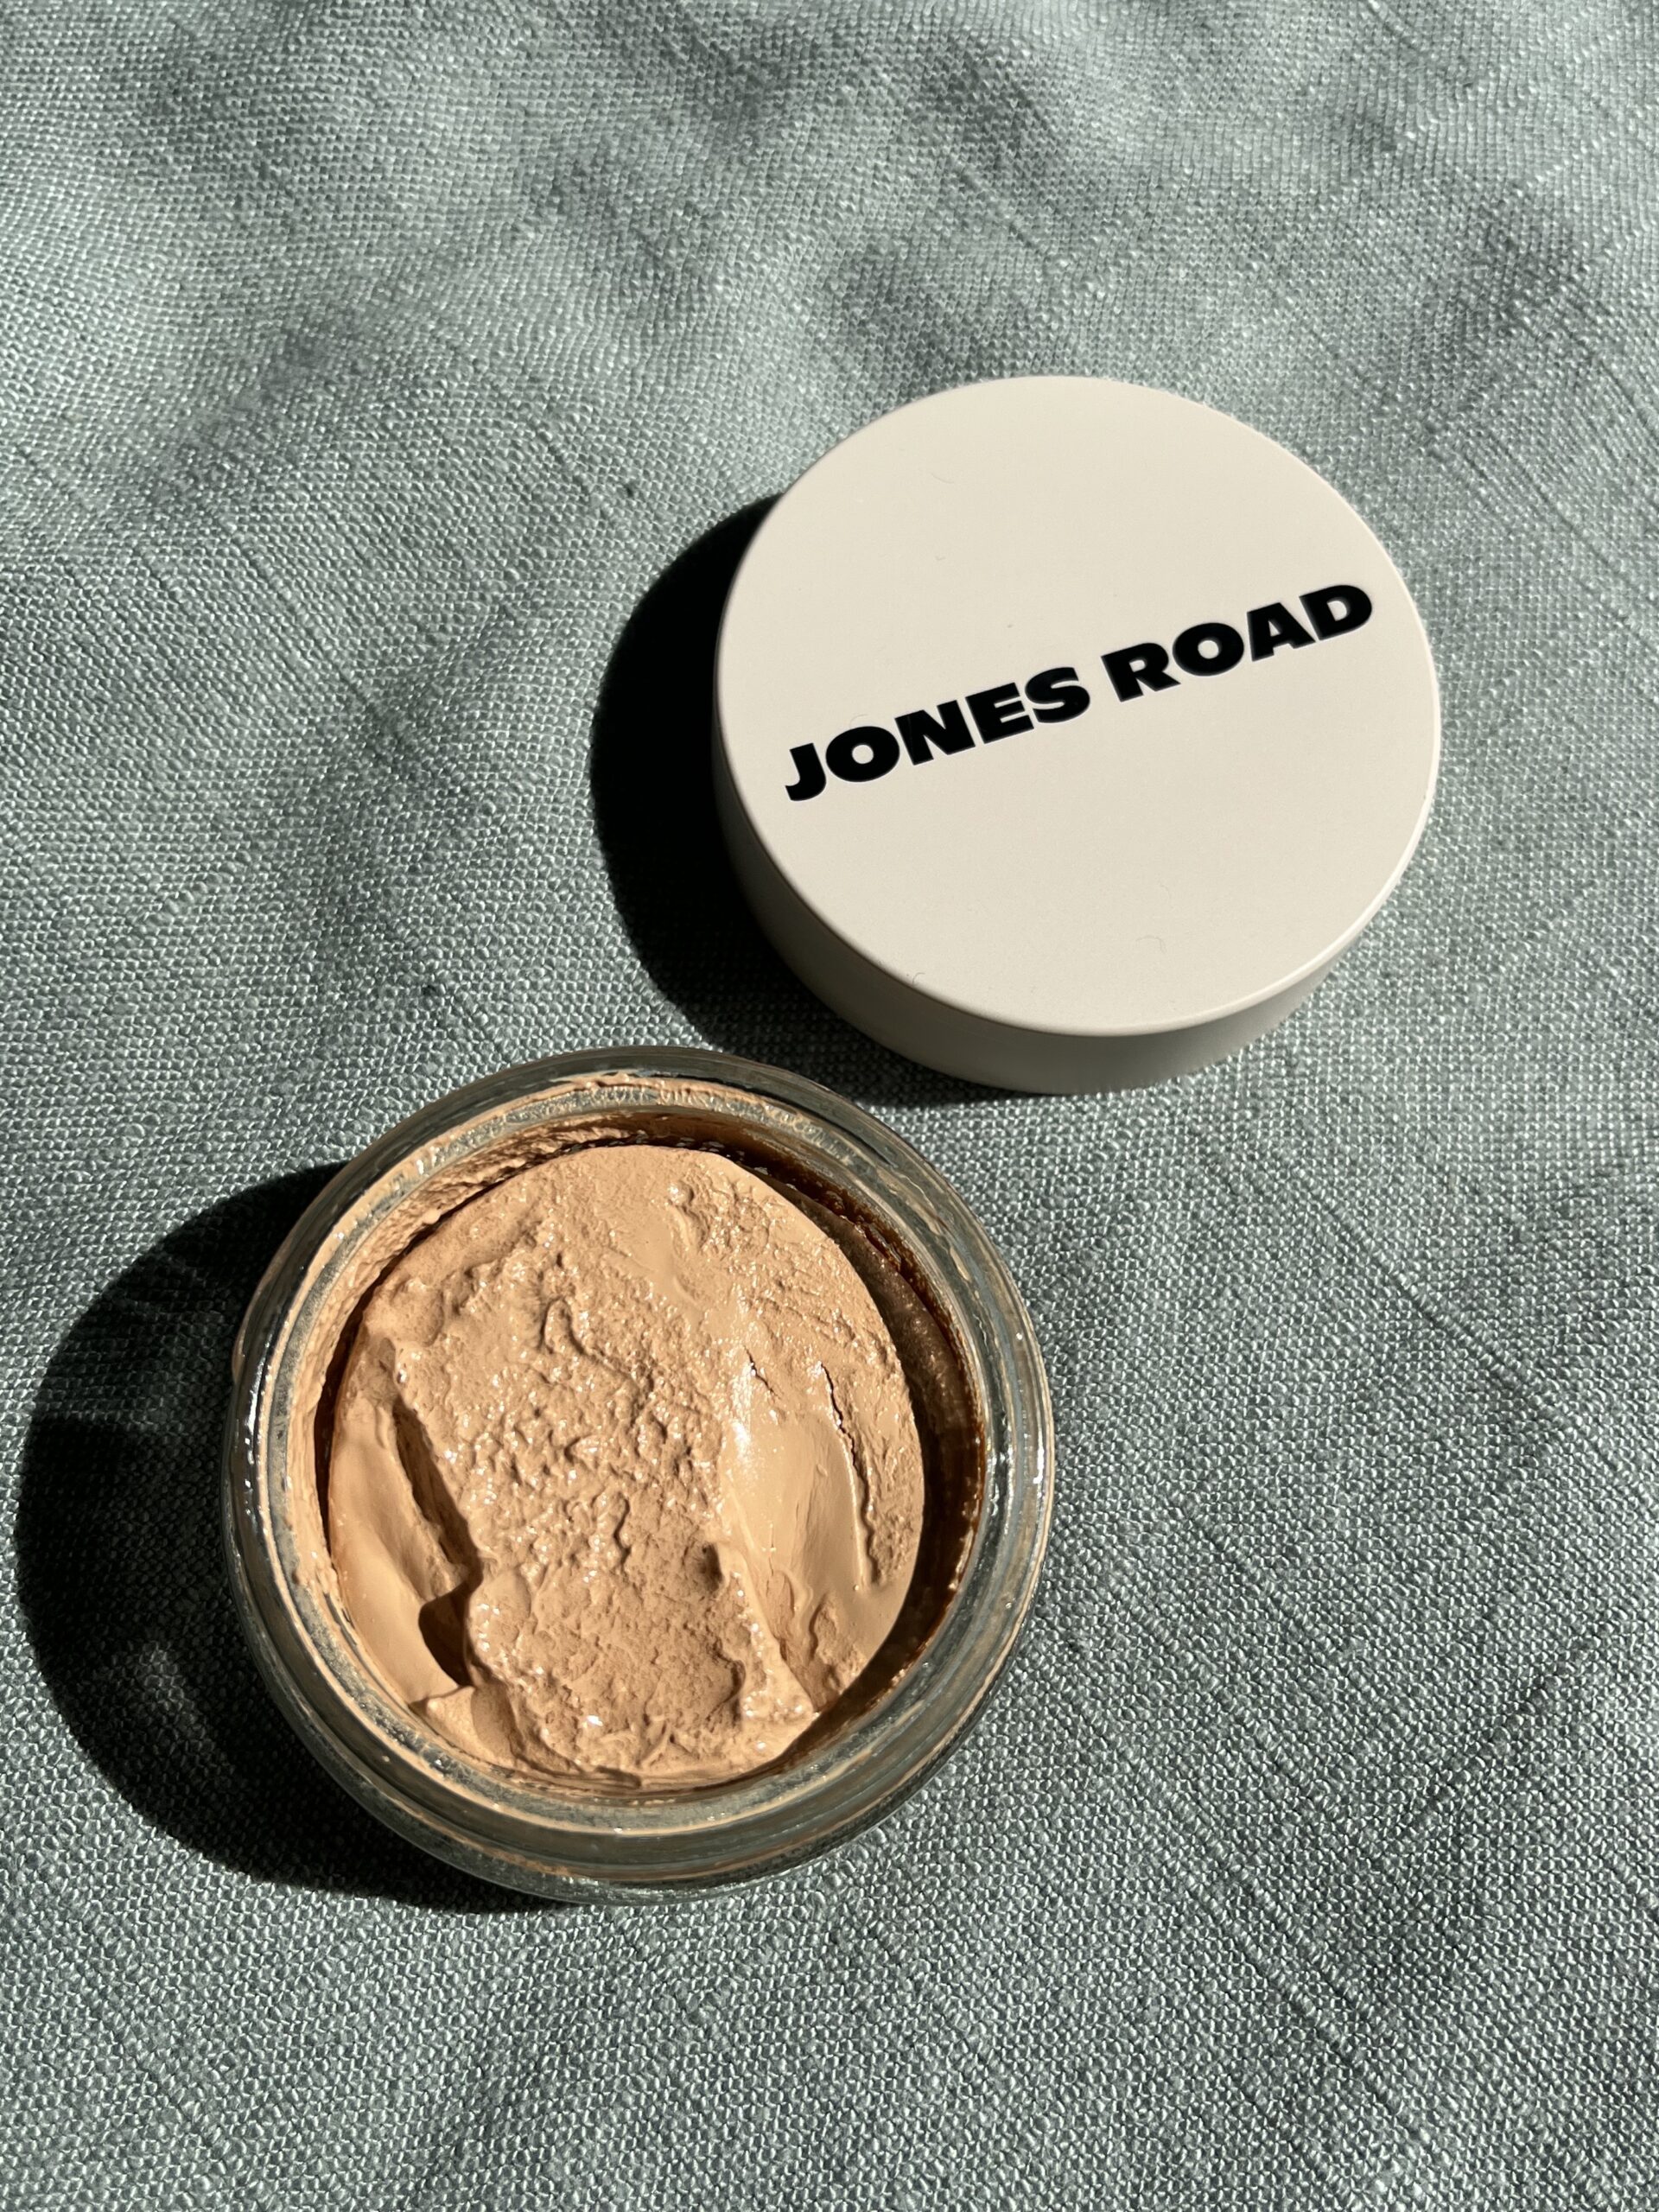 Open jar of jones road cream makeup beside its white lid on a textured blue surface.